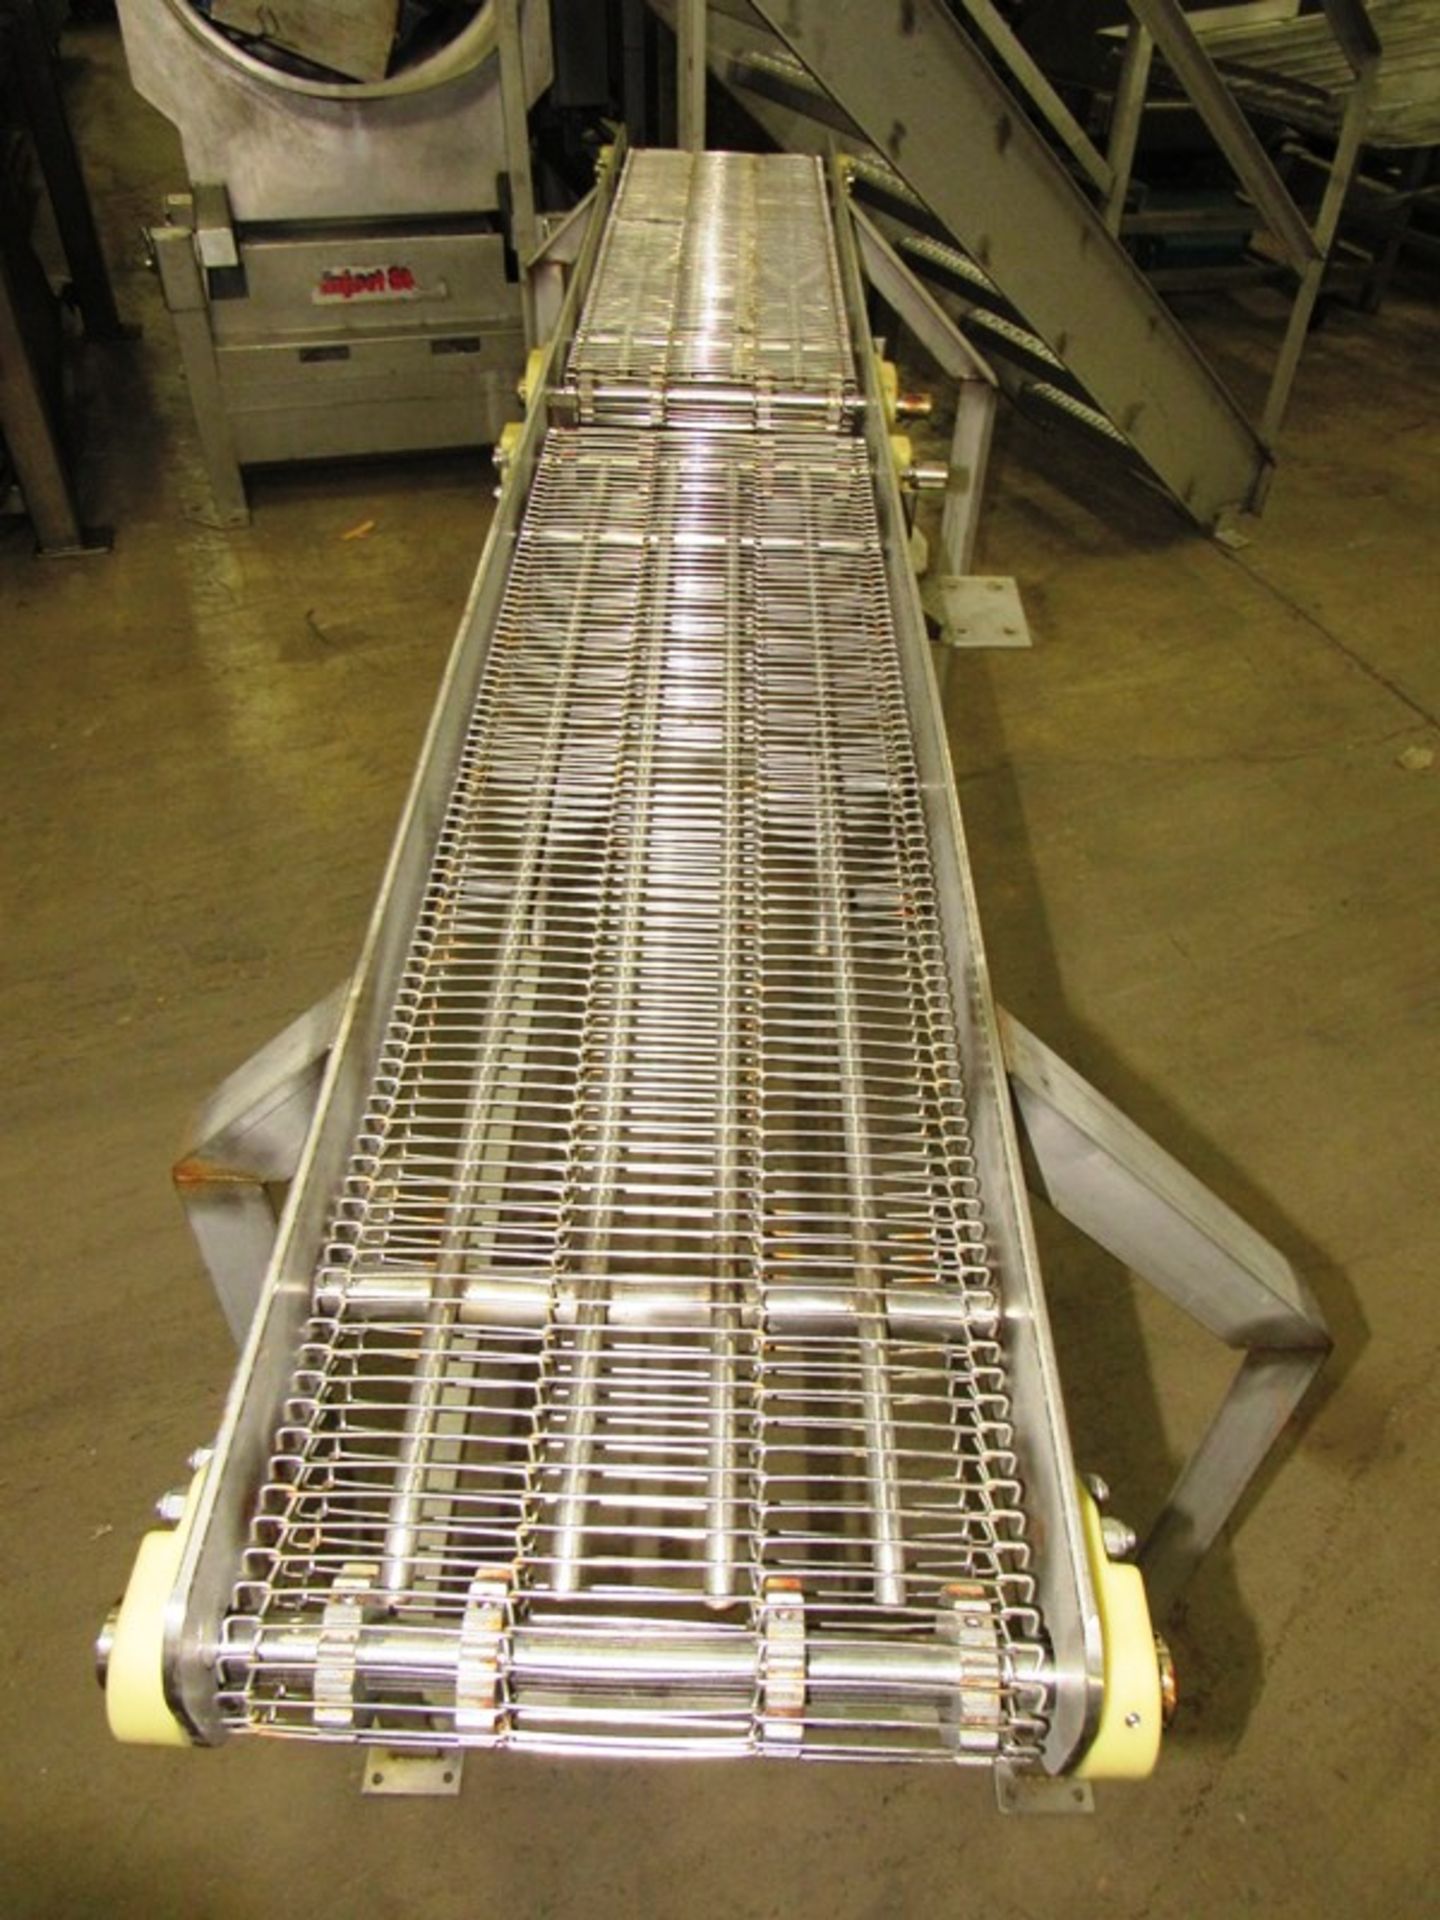 Stainless Steel Conveyor, 12" W X 90" L (2 belts 39" L) with 5" space between, no drive - Image 3 of 4